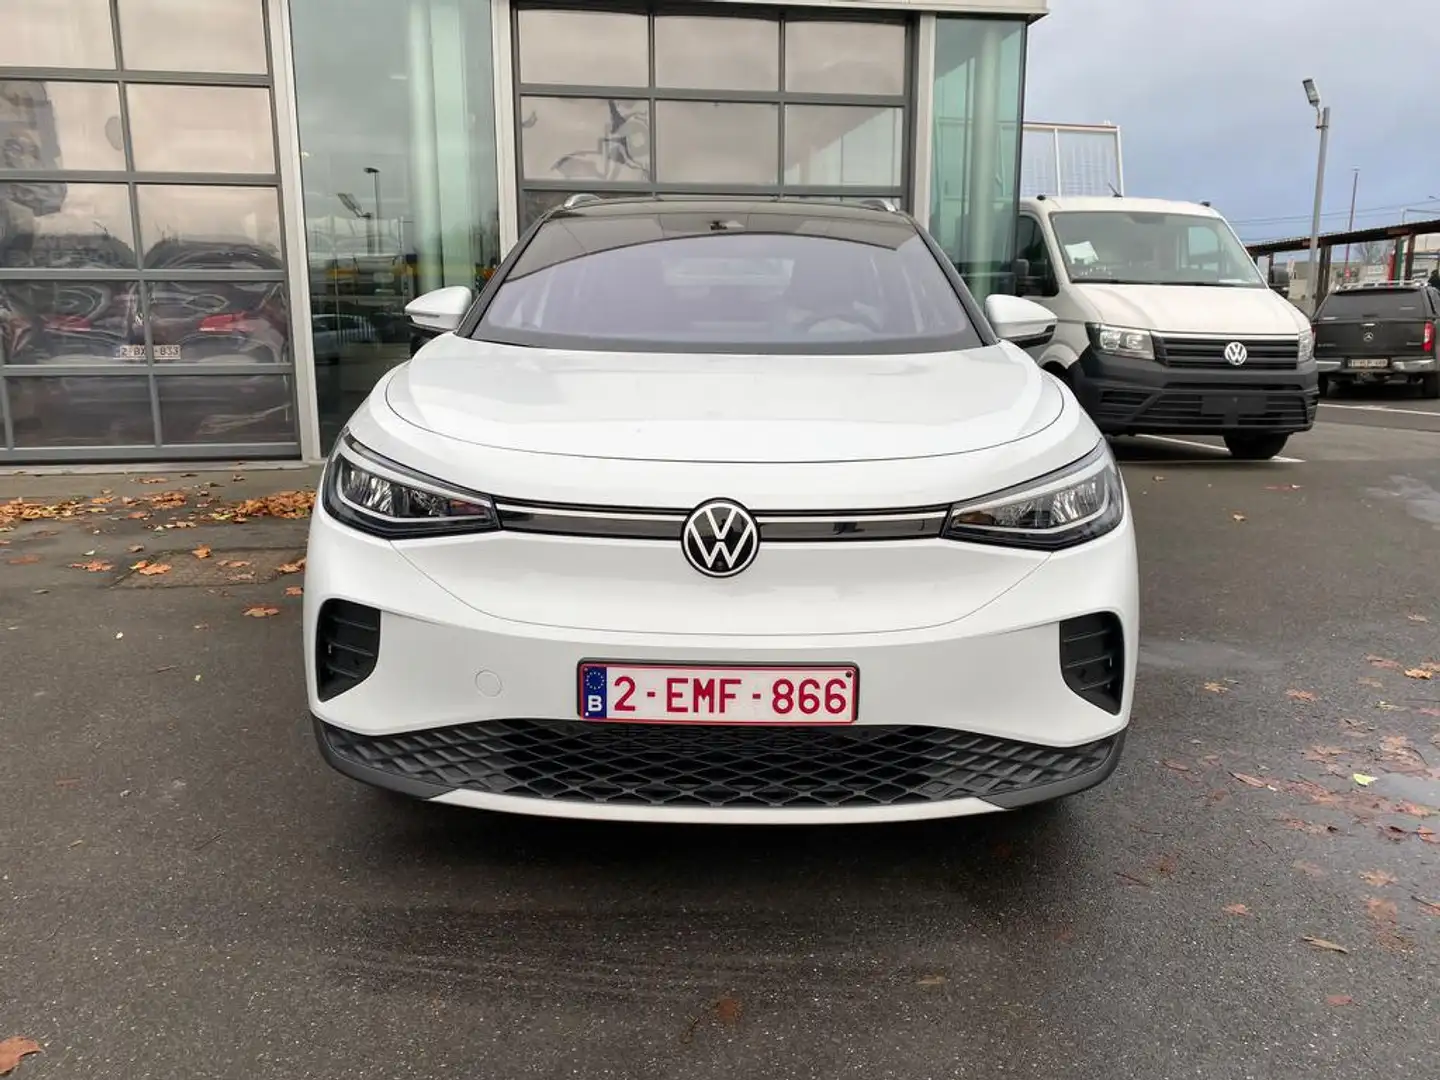 Volkswagen ID.4 Pro Performance 150 kW (204 PS) - 77 kWh, 1-speed  White - 2